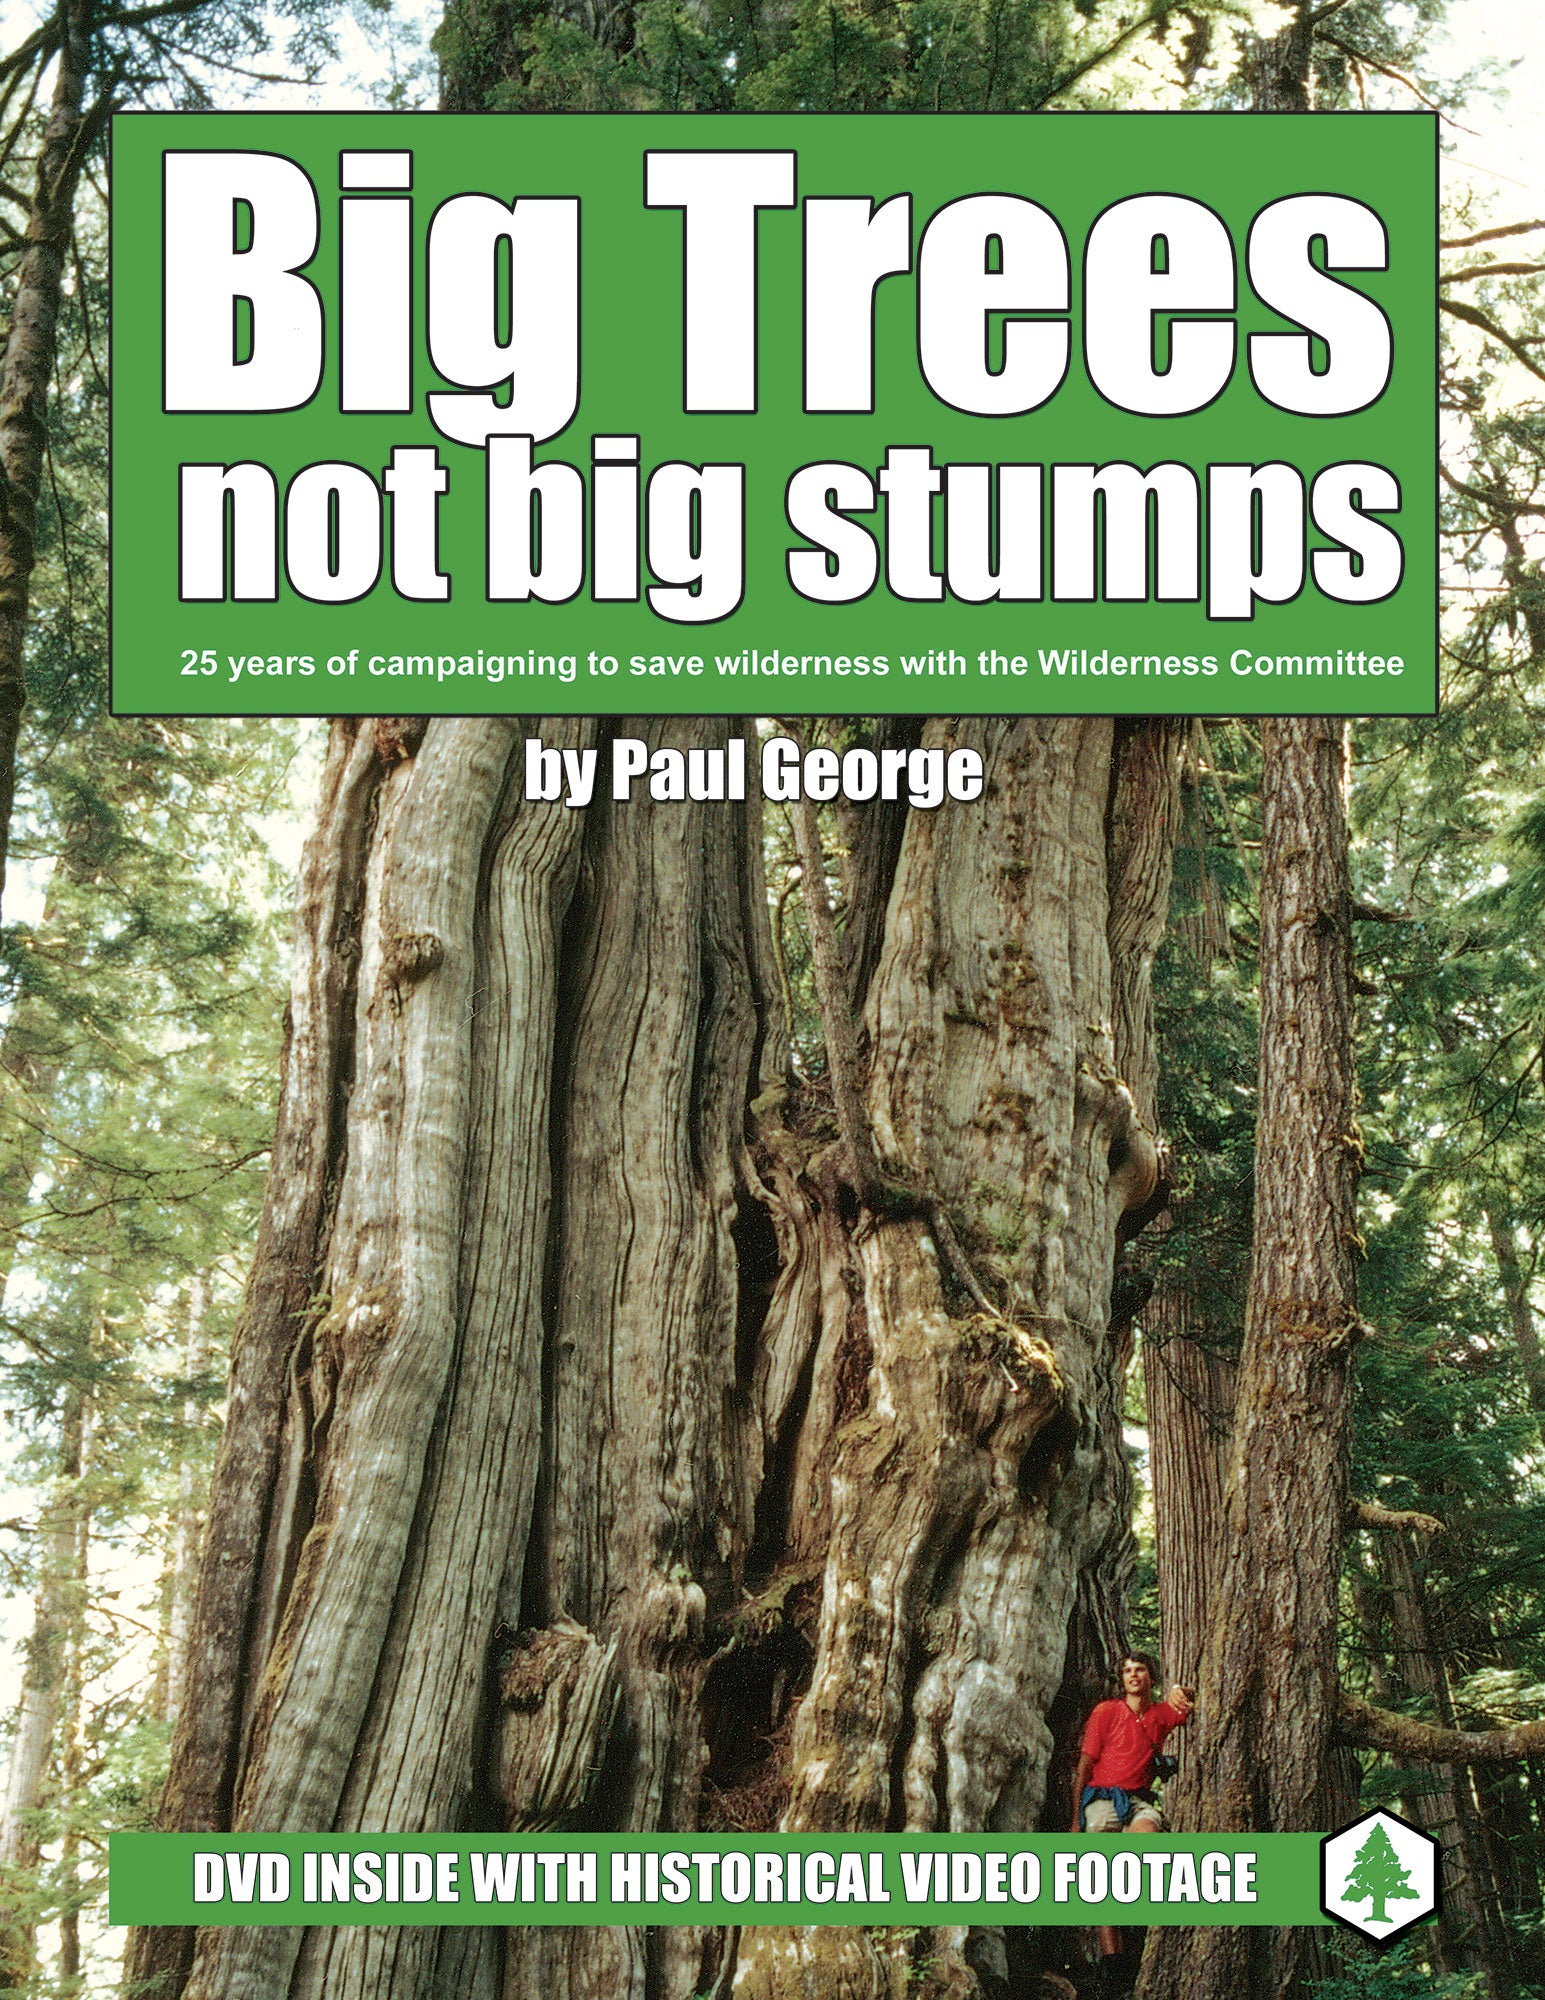 A book cover. There is an image of a person standing on the branches of a giant tree. Text over the image says "Big Trees not big stumps. 25 years of campaigning to save wilderness with the Wilderness Committee by Paul George. DVD inside with historical video footage." End of image description.